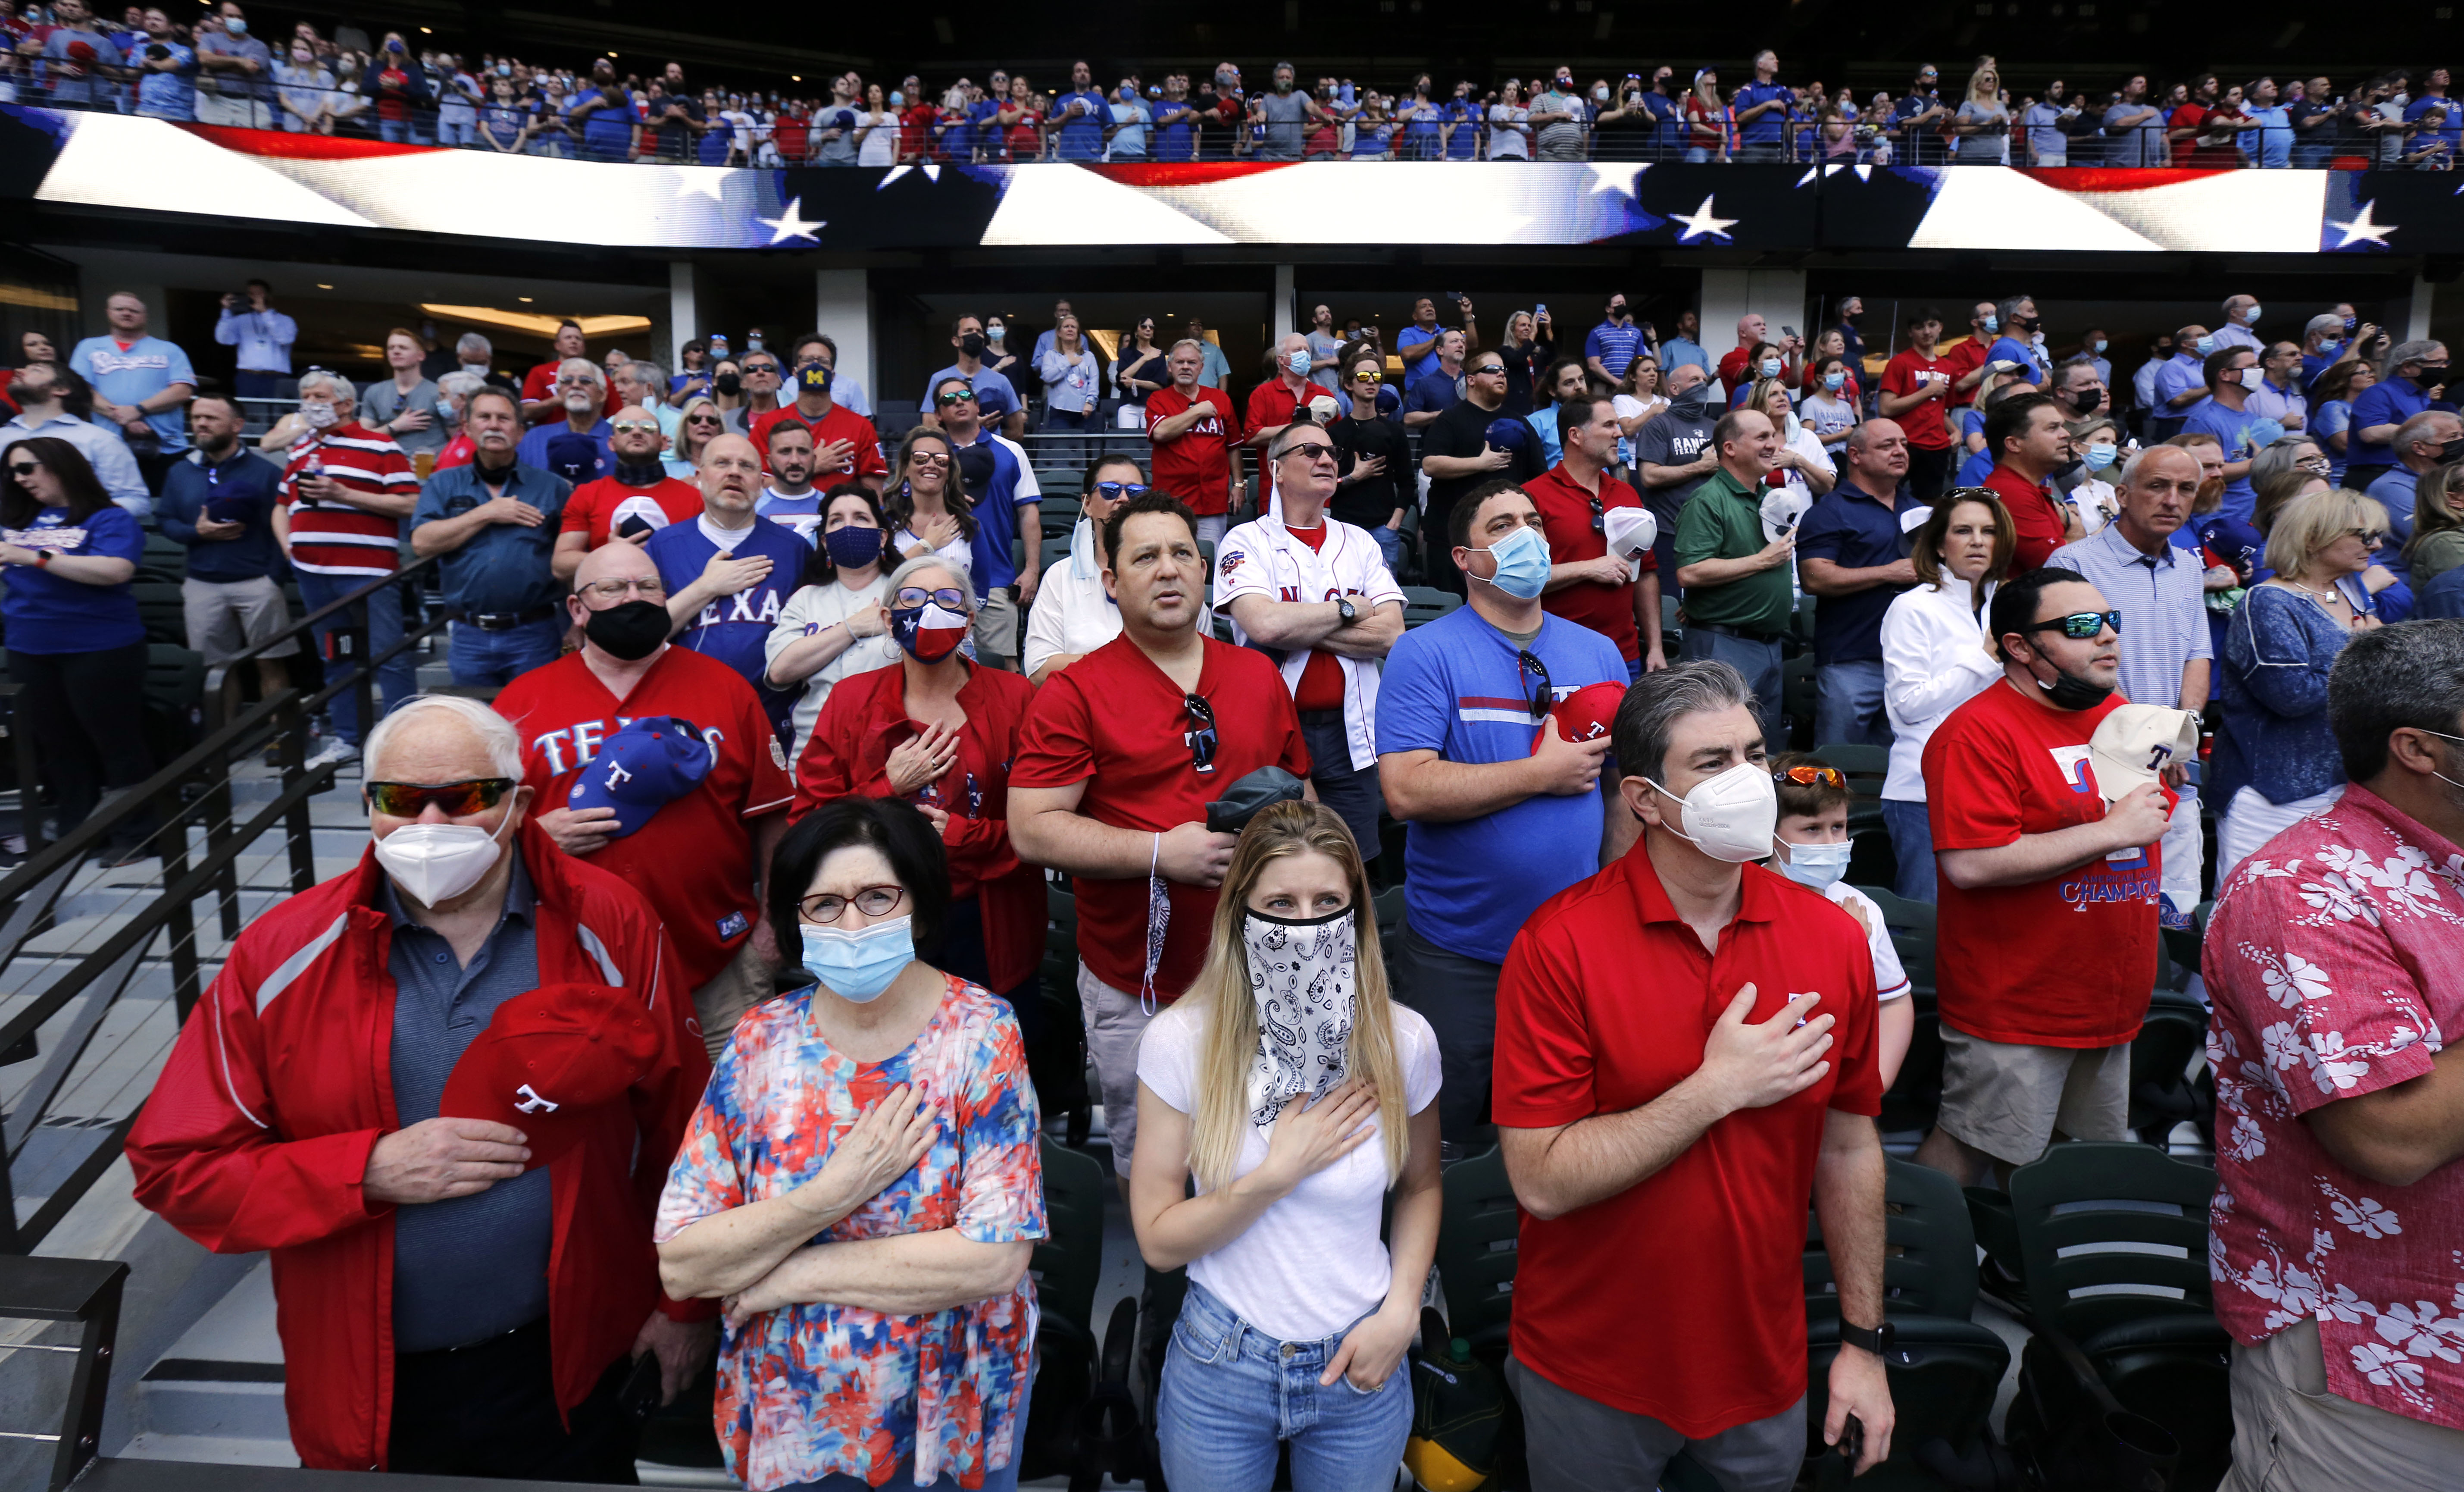 Near-capacity crowd gathers at Globe Life Field as Rangers fans seek return  to normalcy in largest documented event during pandemic